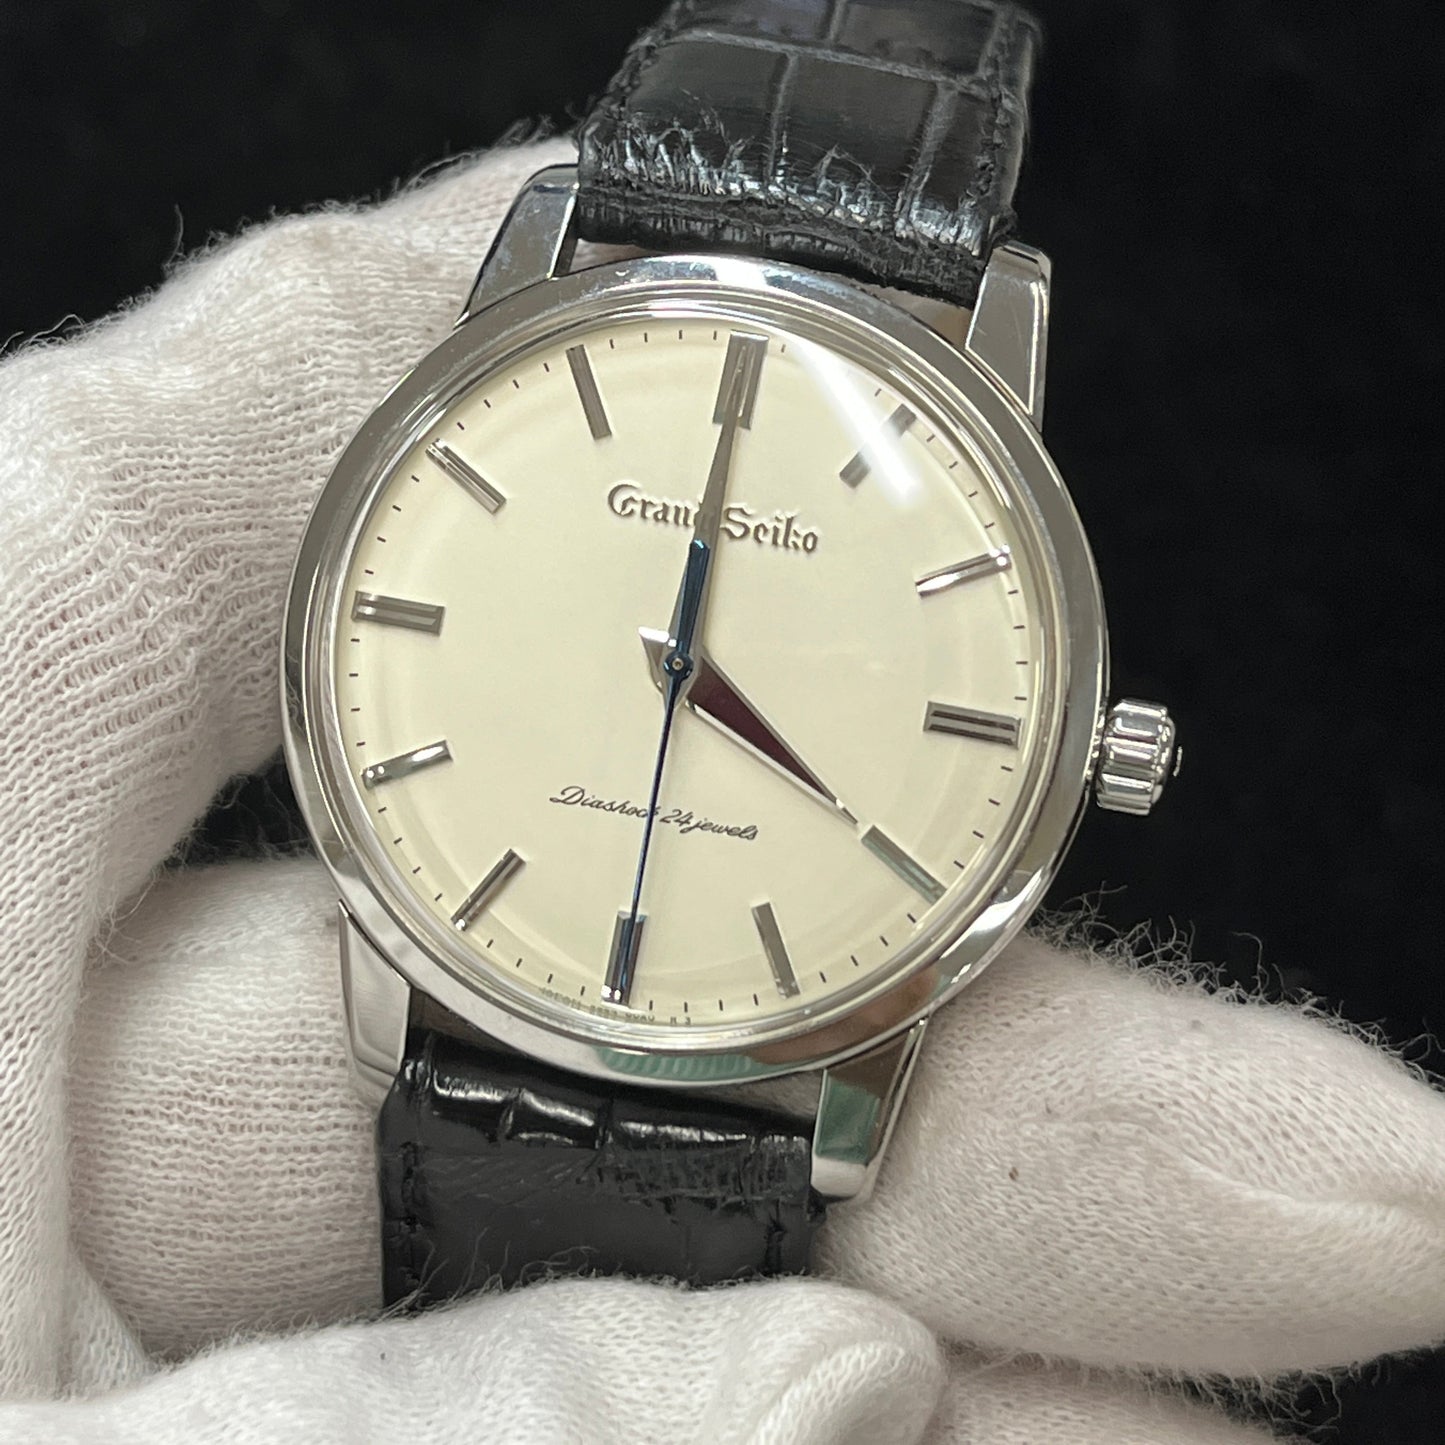 SBGW033　Grand Seiko 130th anniversary Limited Edition of 1300　2GSE01-00098